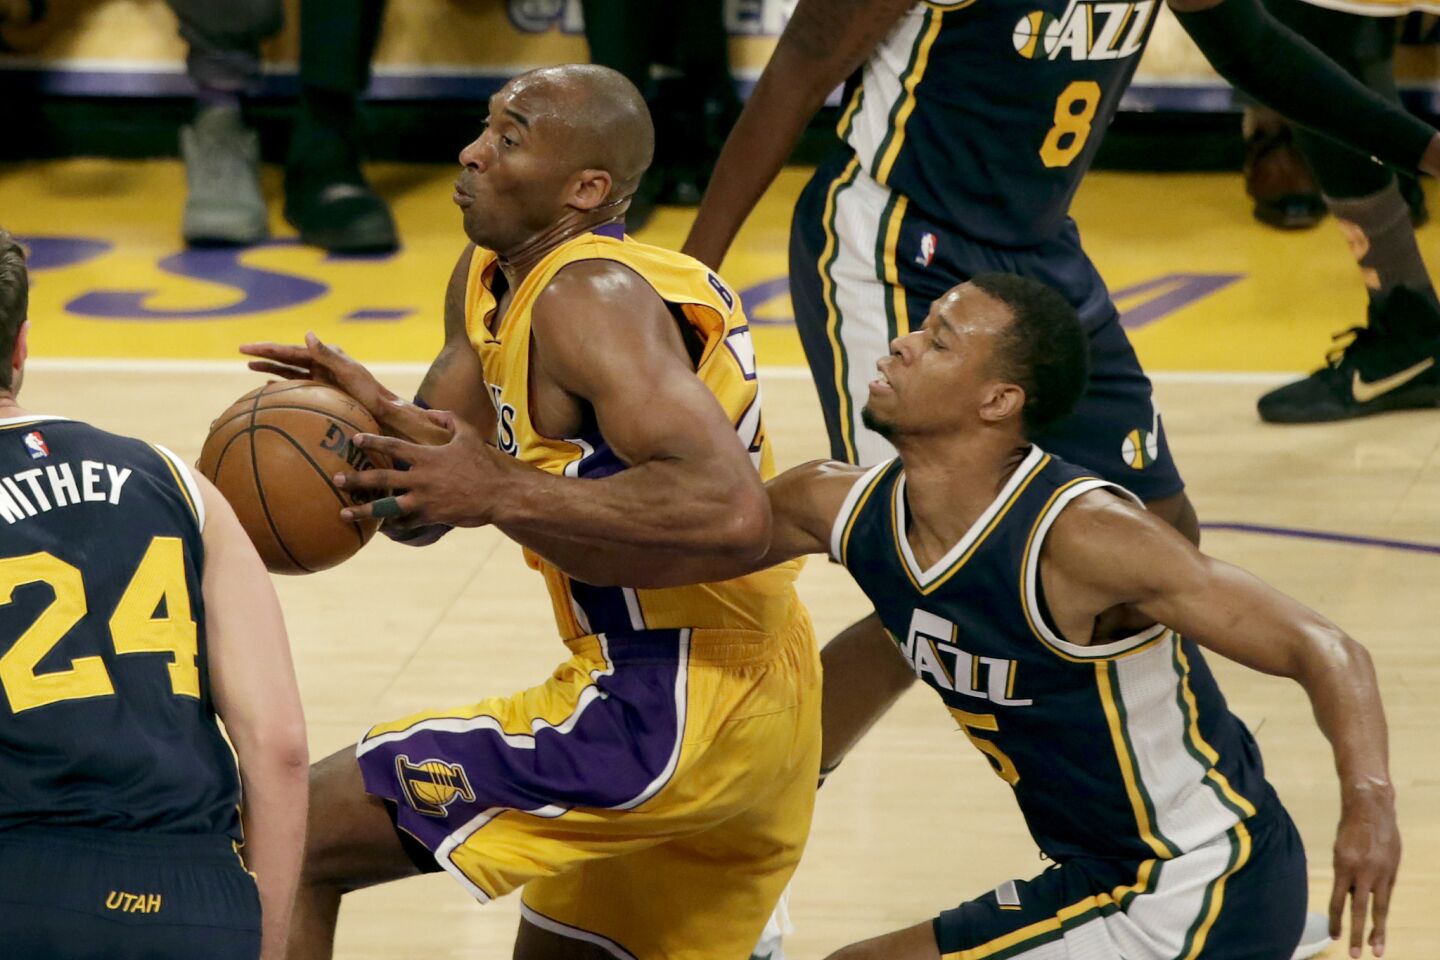 Kobe Bryant is stripped of the ball by Jazz guard Rodney Hood during first half action at Staples Center.